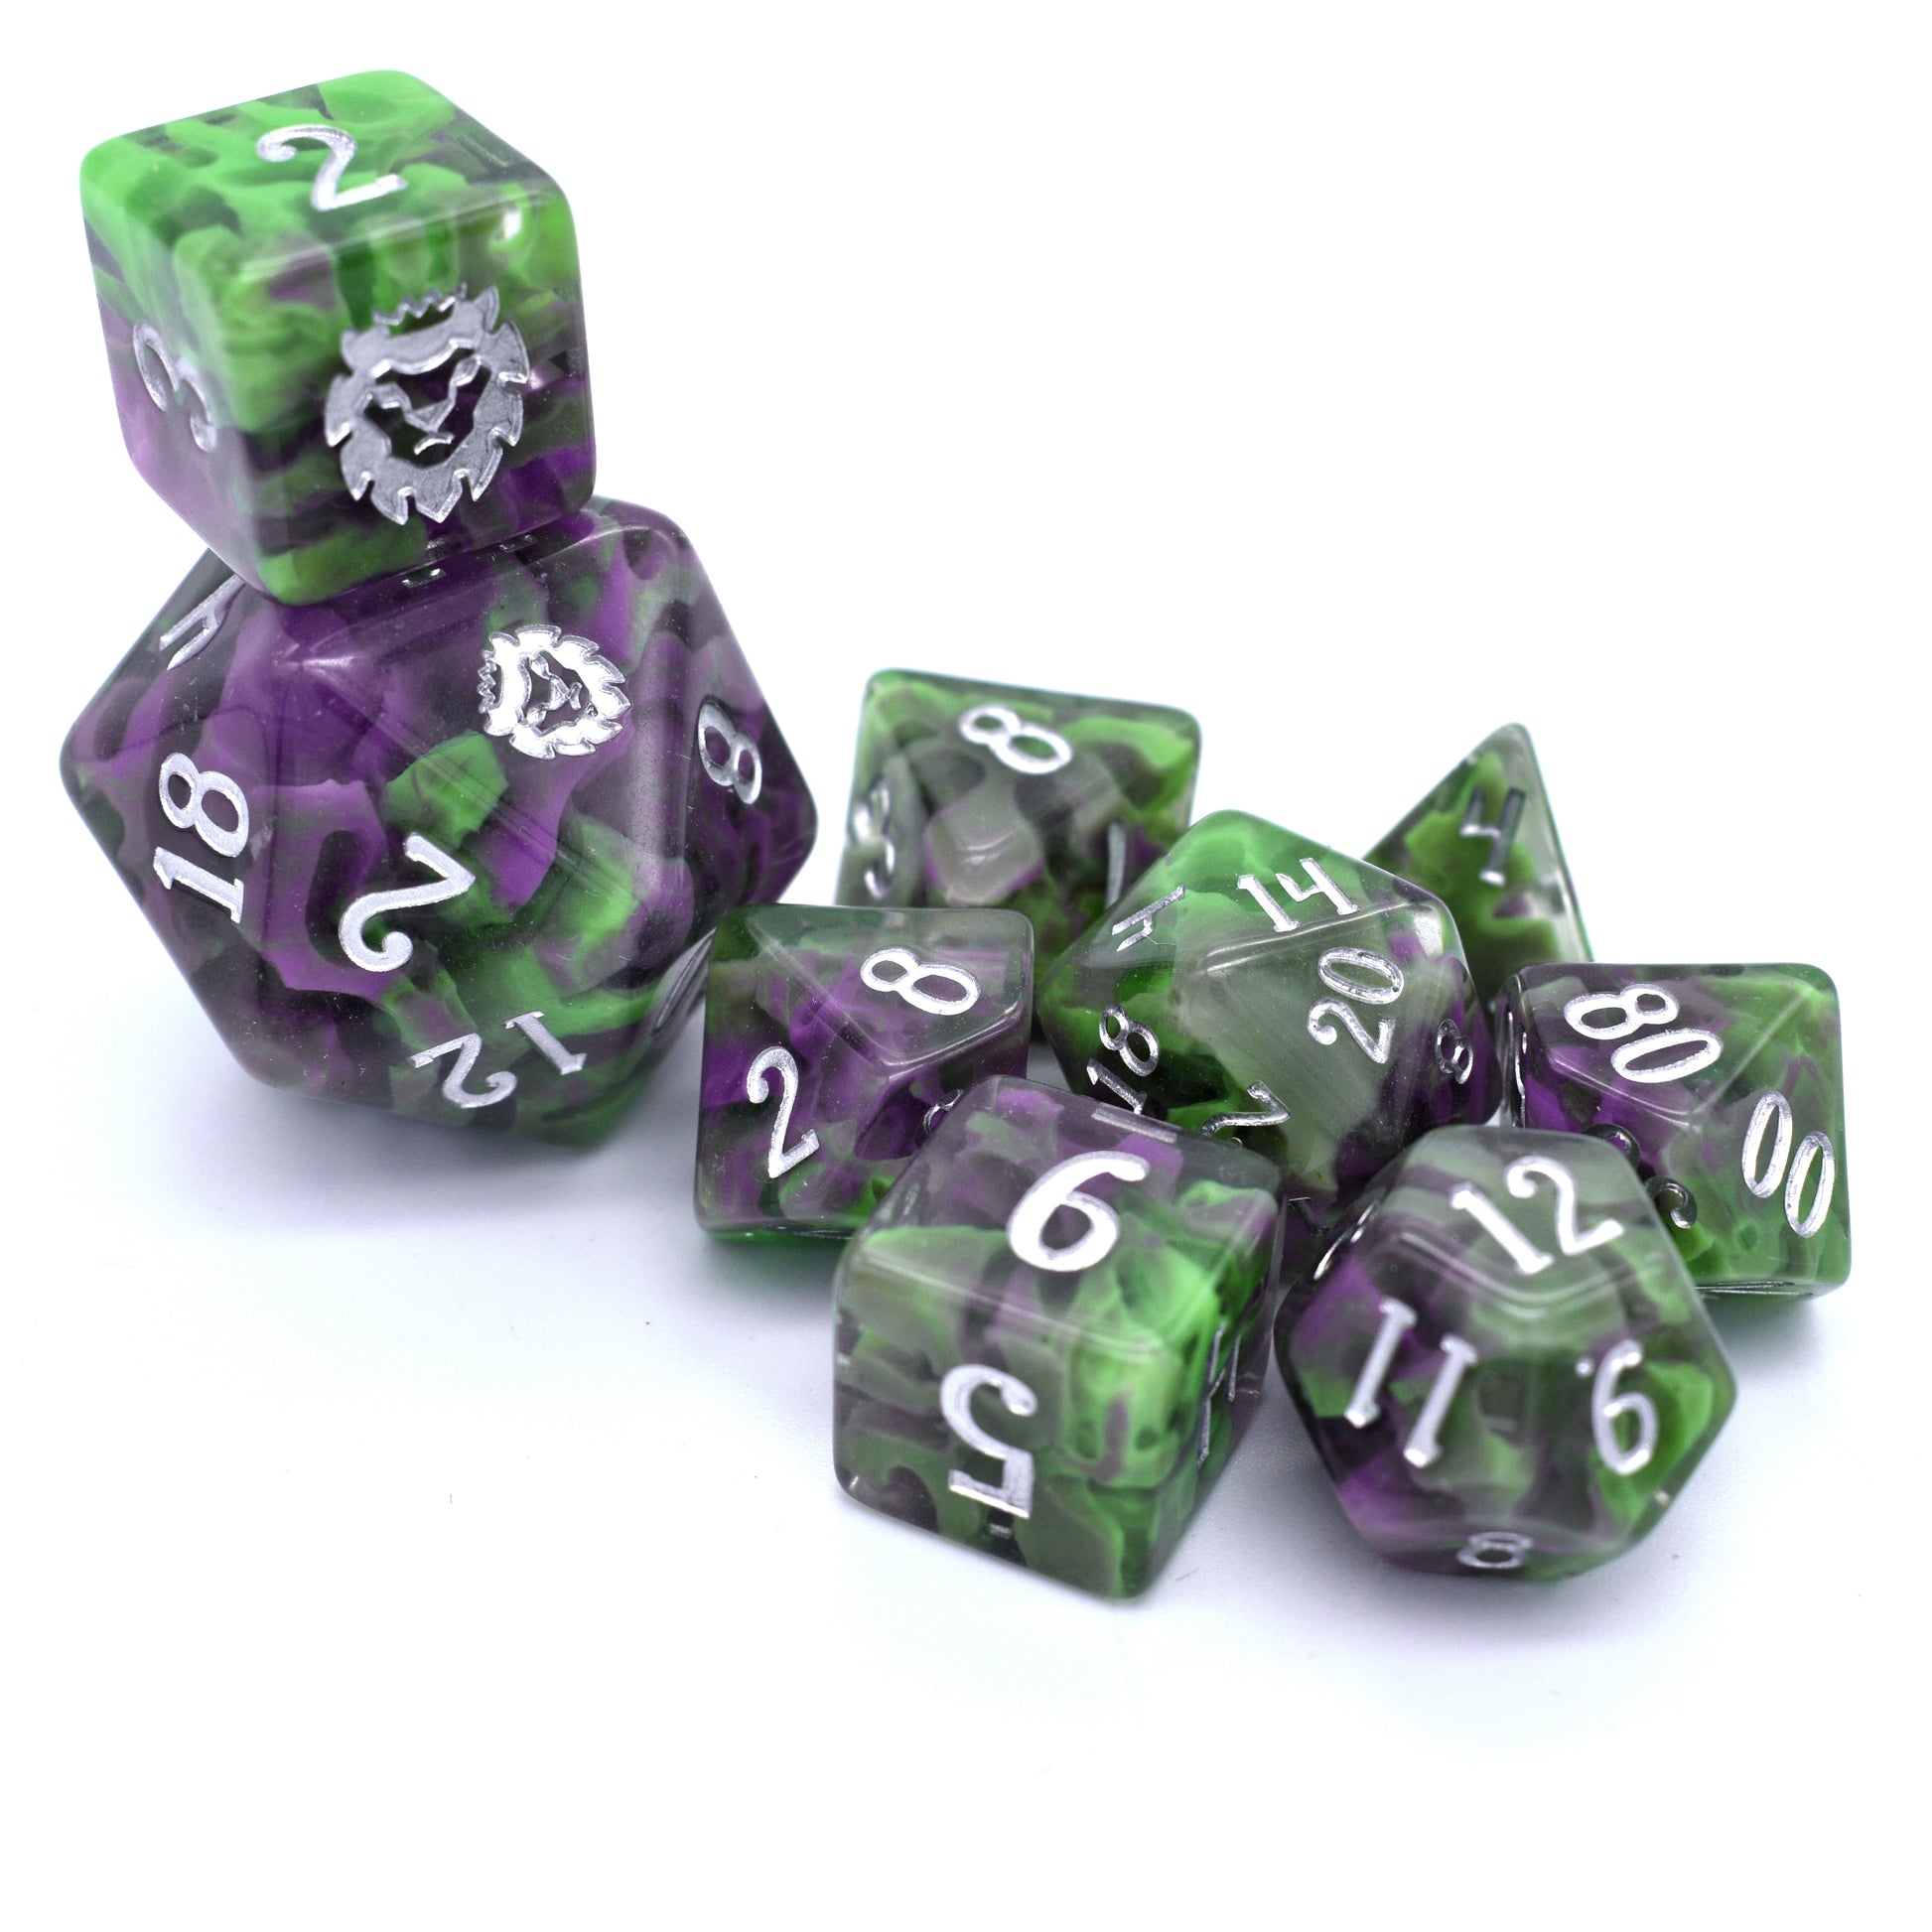 This 10-piece green and purple resin swirled set is inked with silver to really stand out when you need to do some sinister plotting.